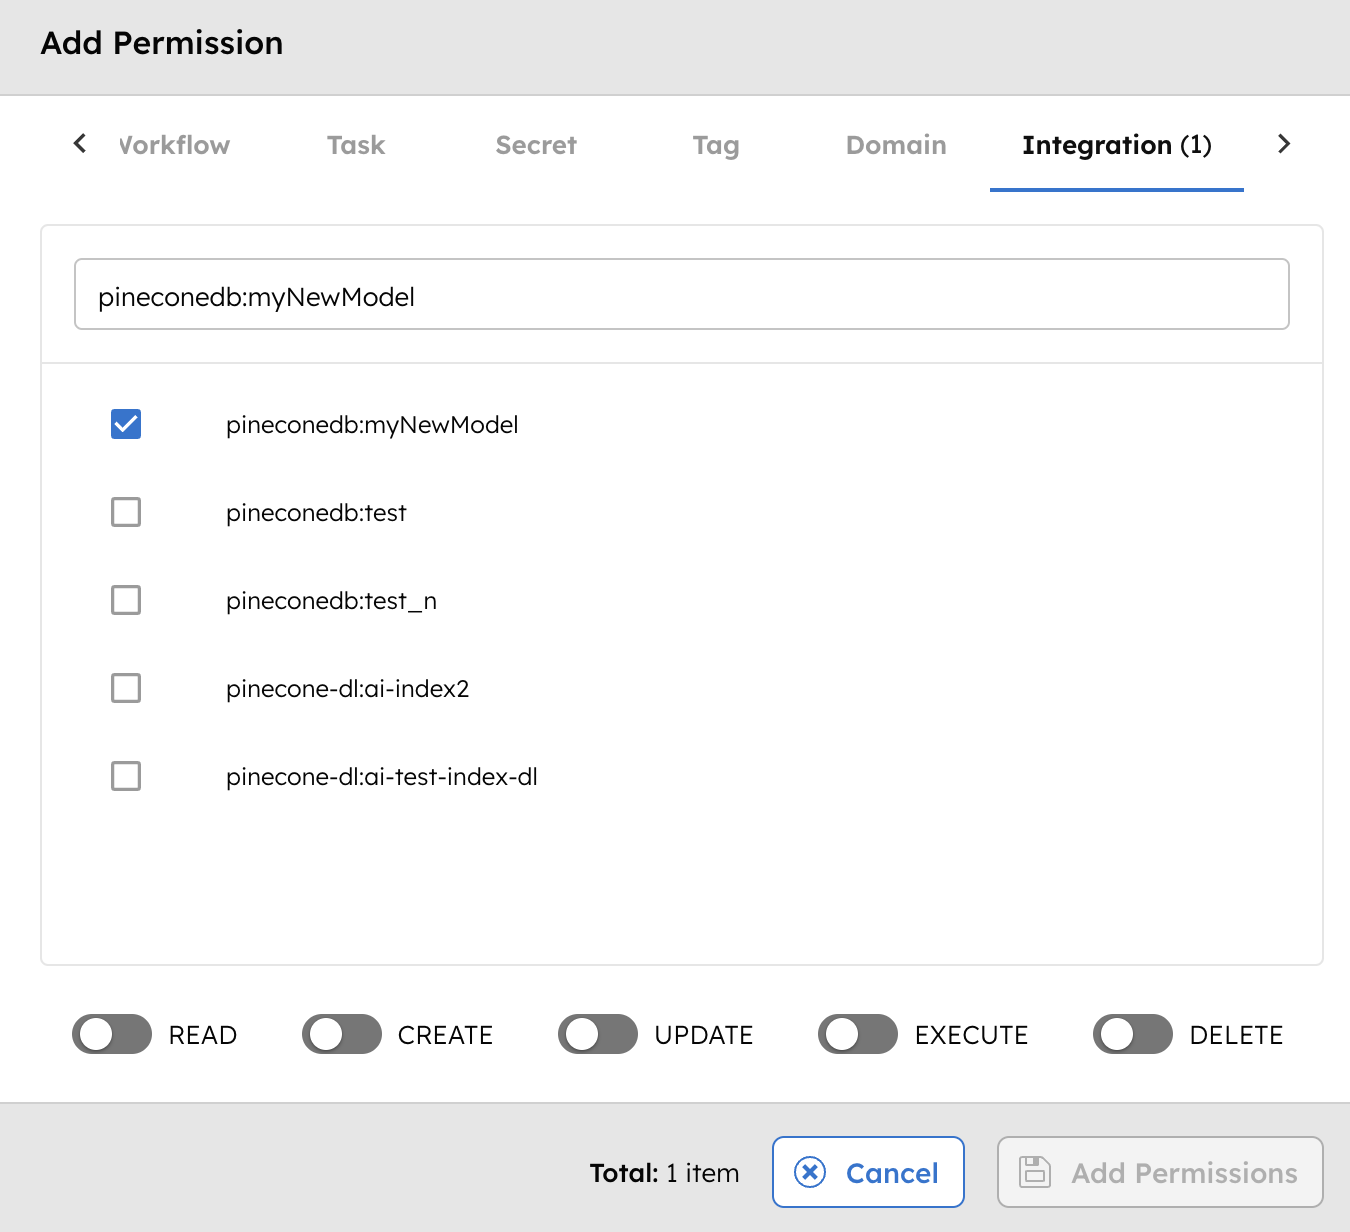 Add Permissions for Vector Database Integration